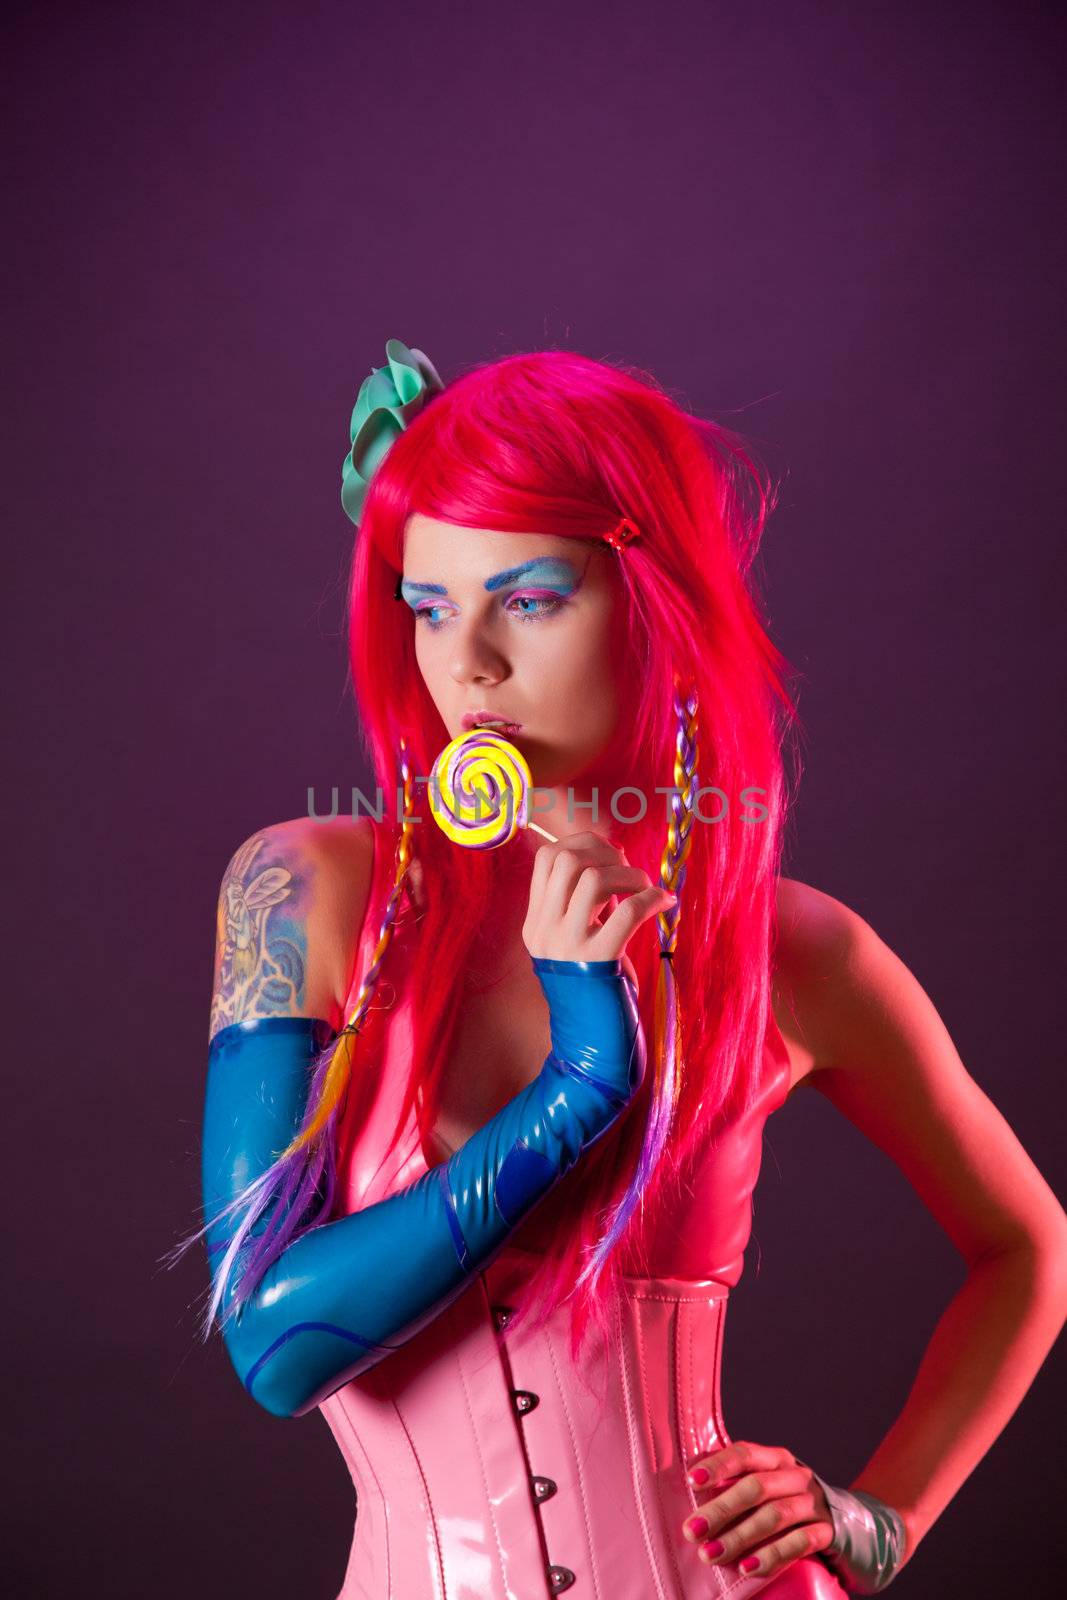 Bright girl with pink hair holding lollipop  by Elisanth